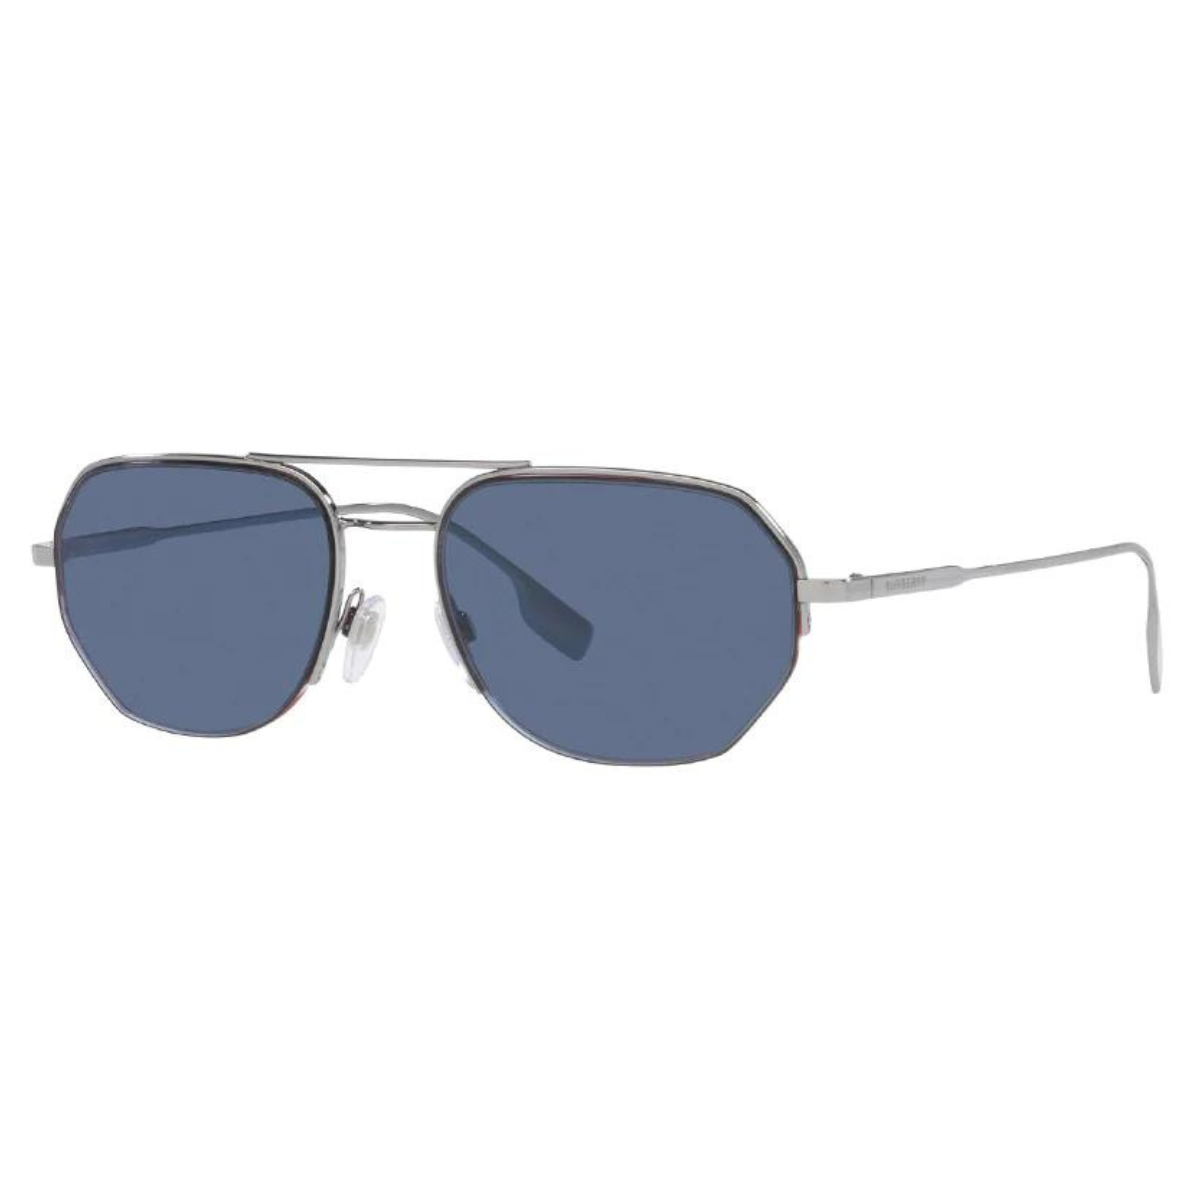 "Shop now for stylish Burberry 3140 sunglasses for men at Optorium: Find pilot shape, polarized, and non-polarized options, perfect for the modern man's eyewear collection."